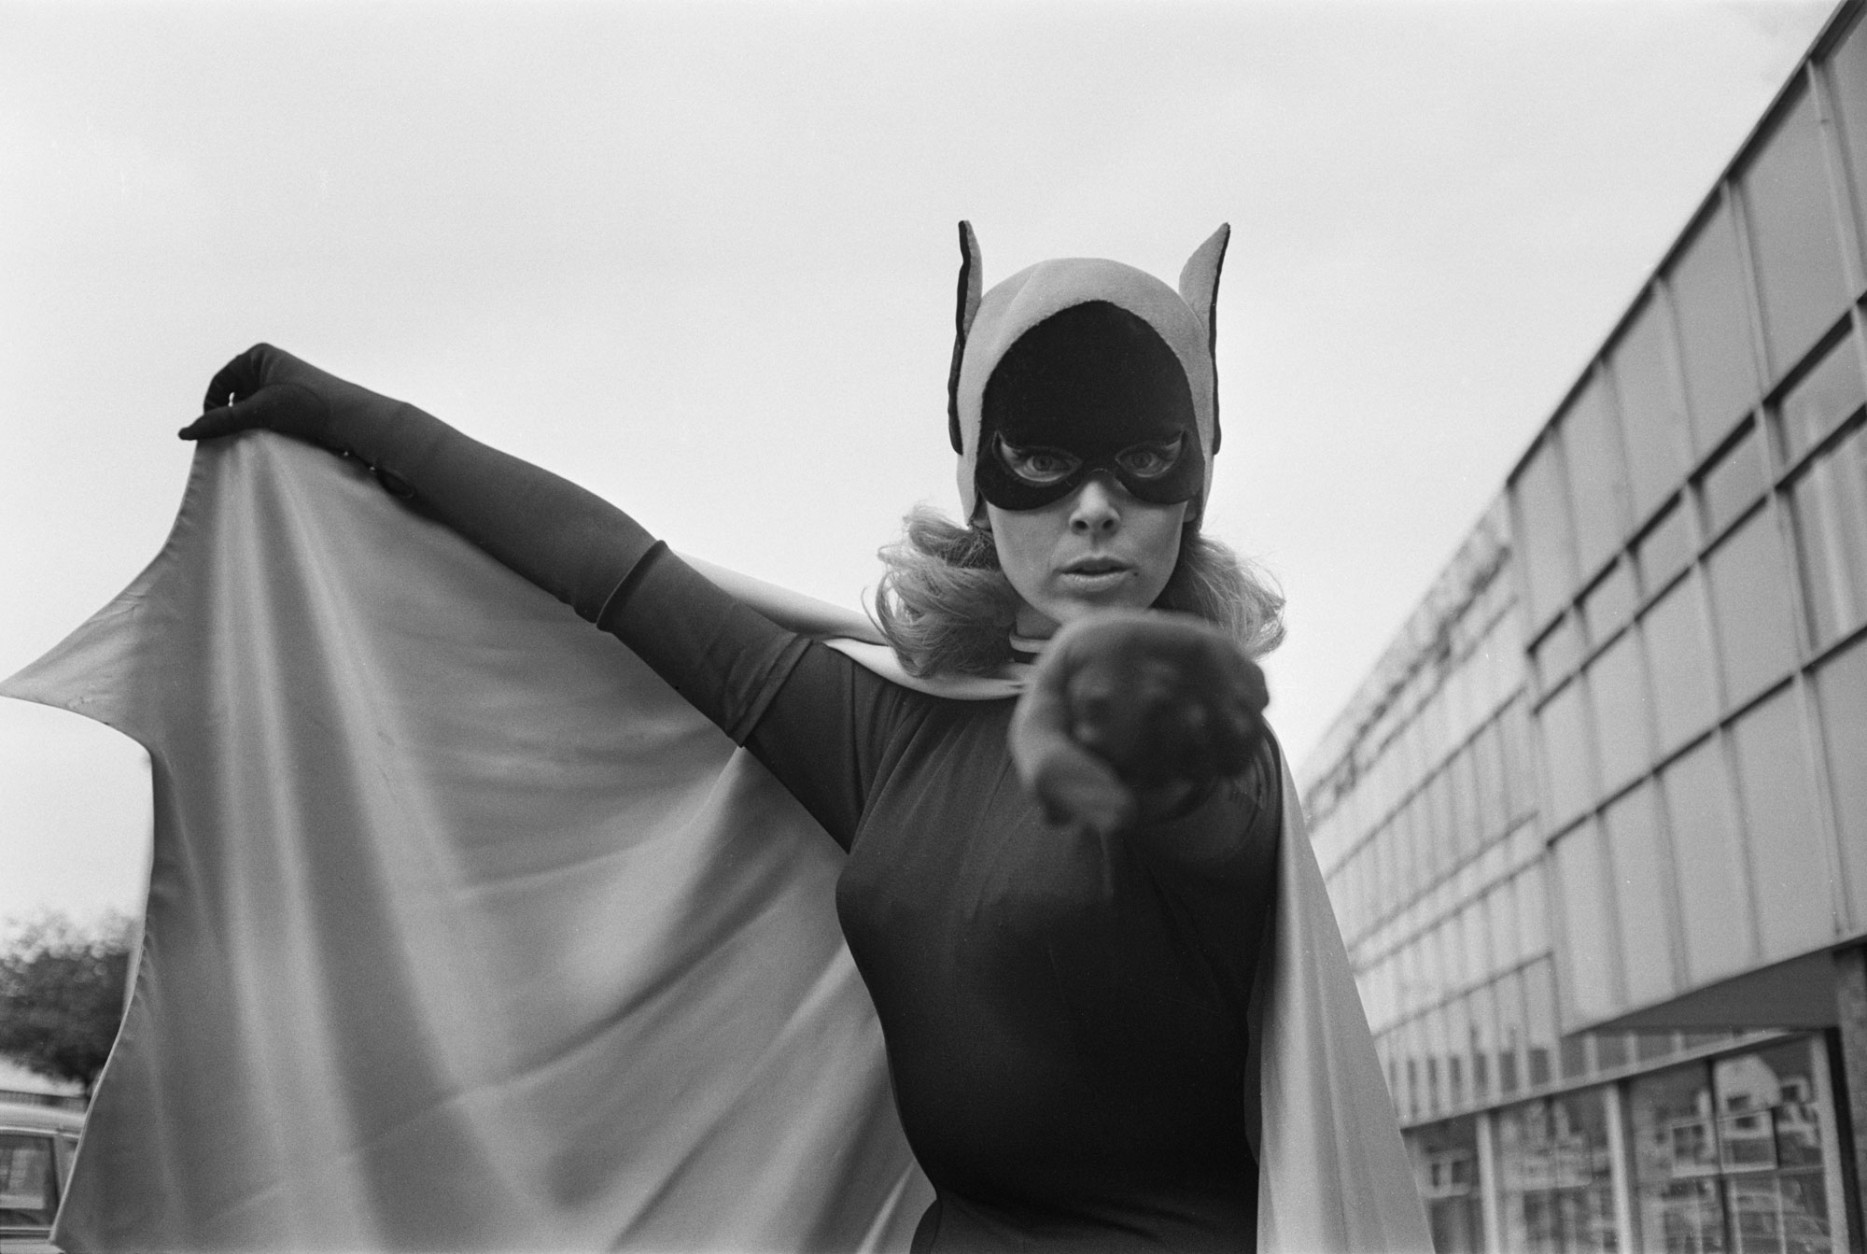 American ballet dancer and actress Yvonne Craig, best known for her role as Batgirl from the TV series 'Batman', 1967. (Photo by Len Trievnor/Express/Hulton Archive/Getty Images)